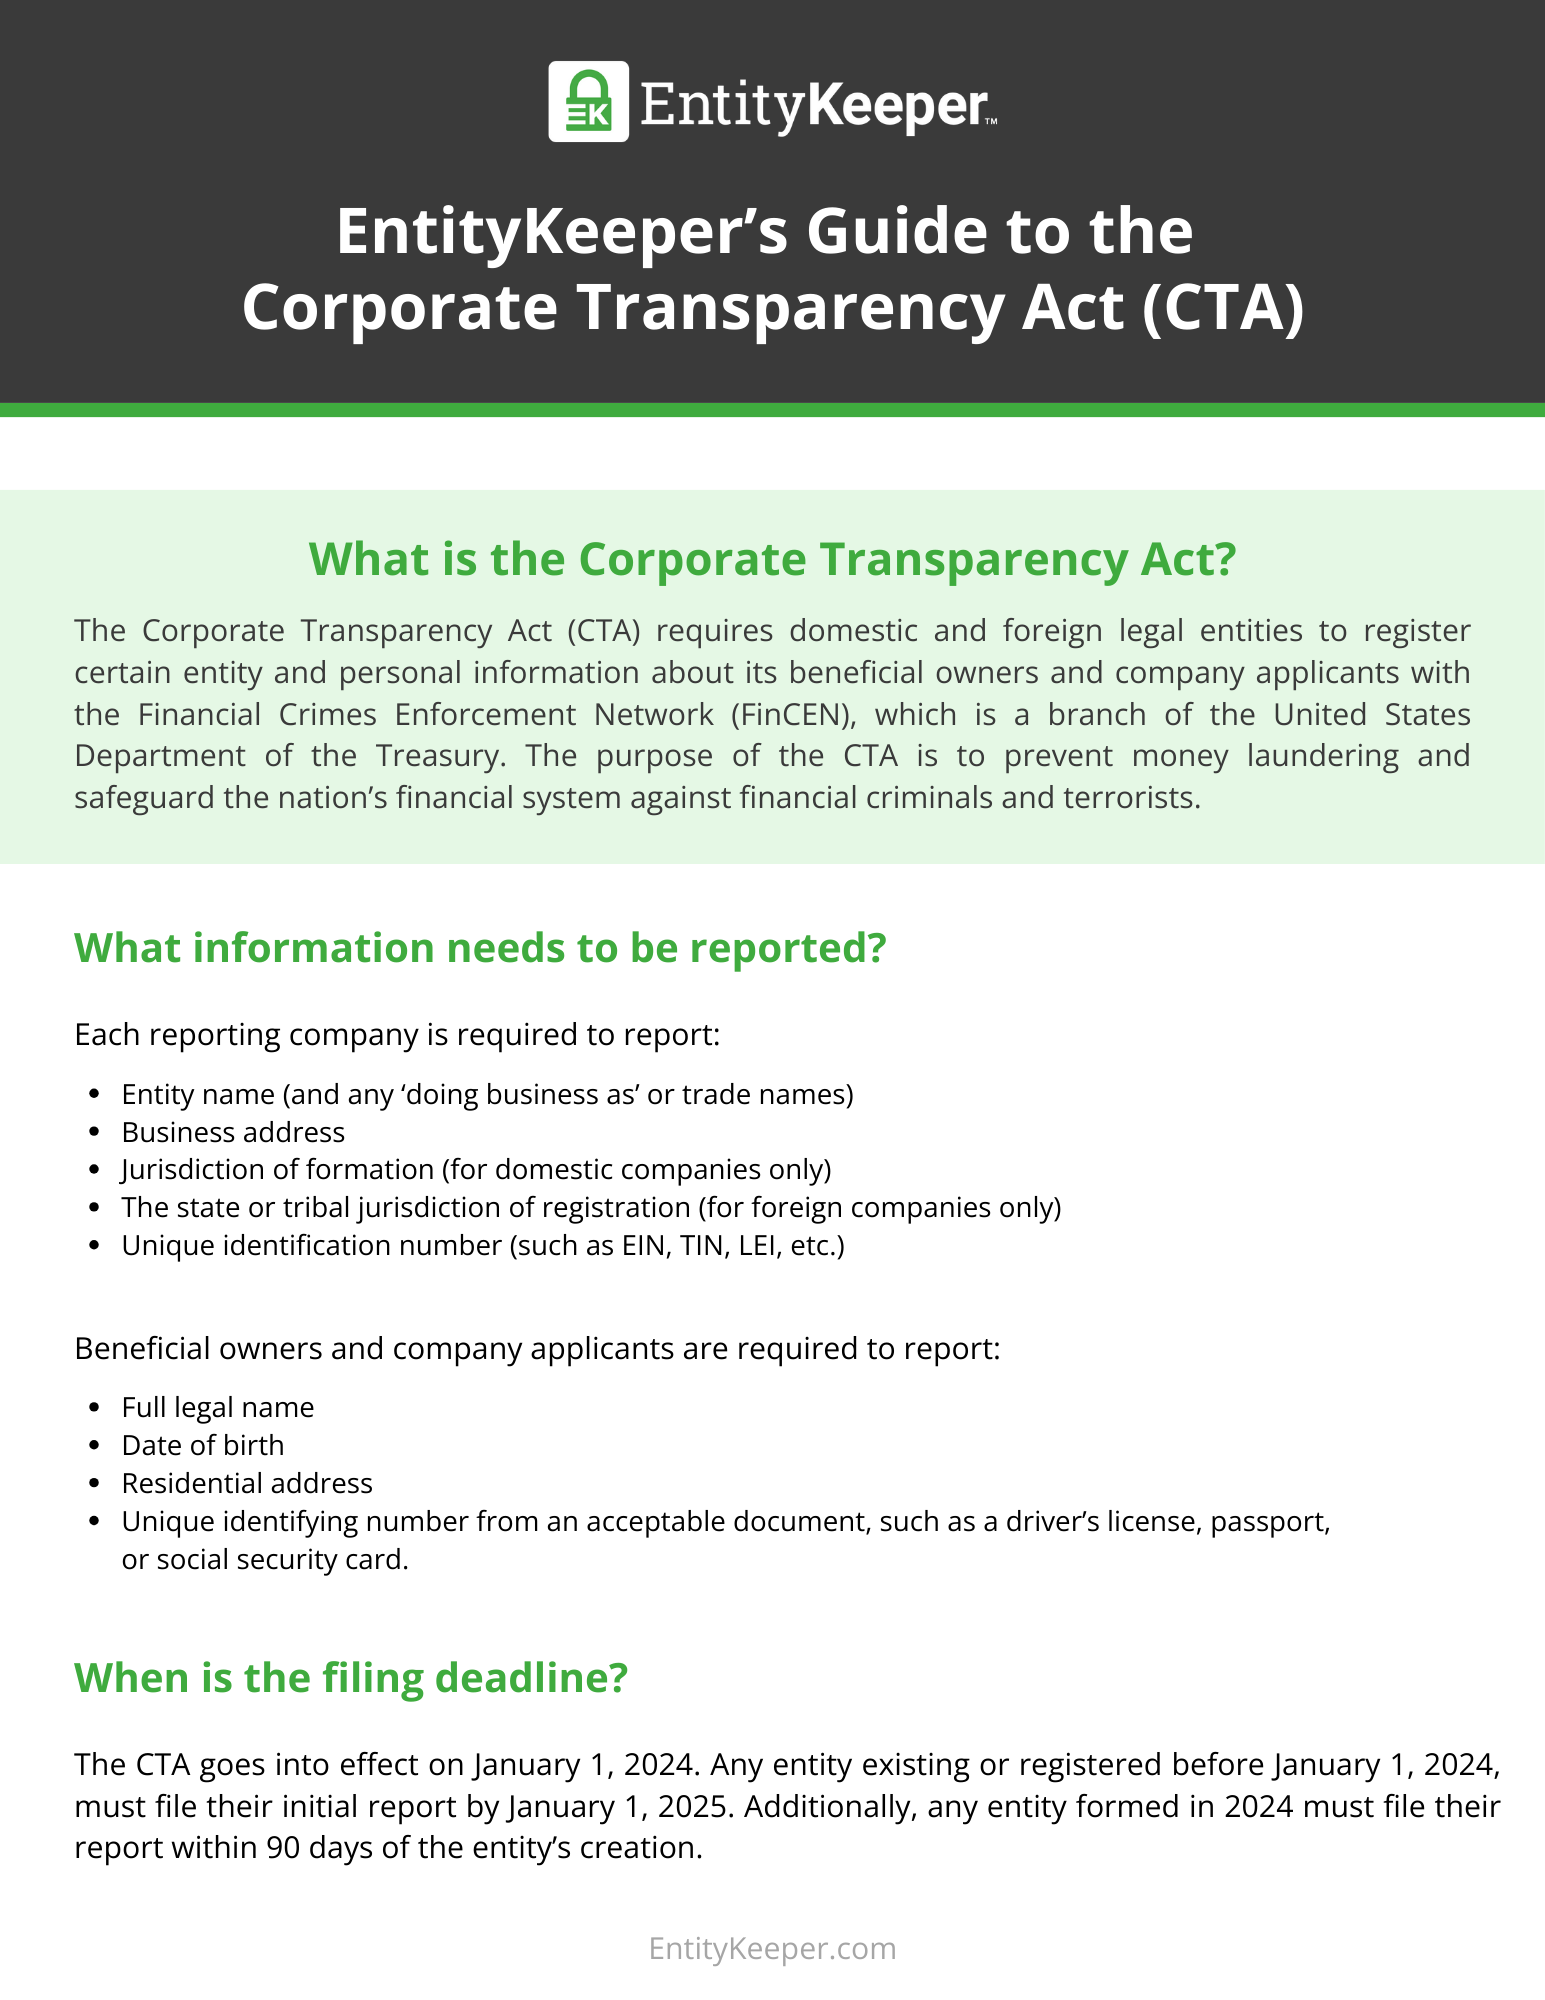 EntityKeeper’s Guide to the Corporate Transparency Act (January 2024).png